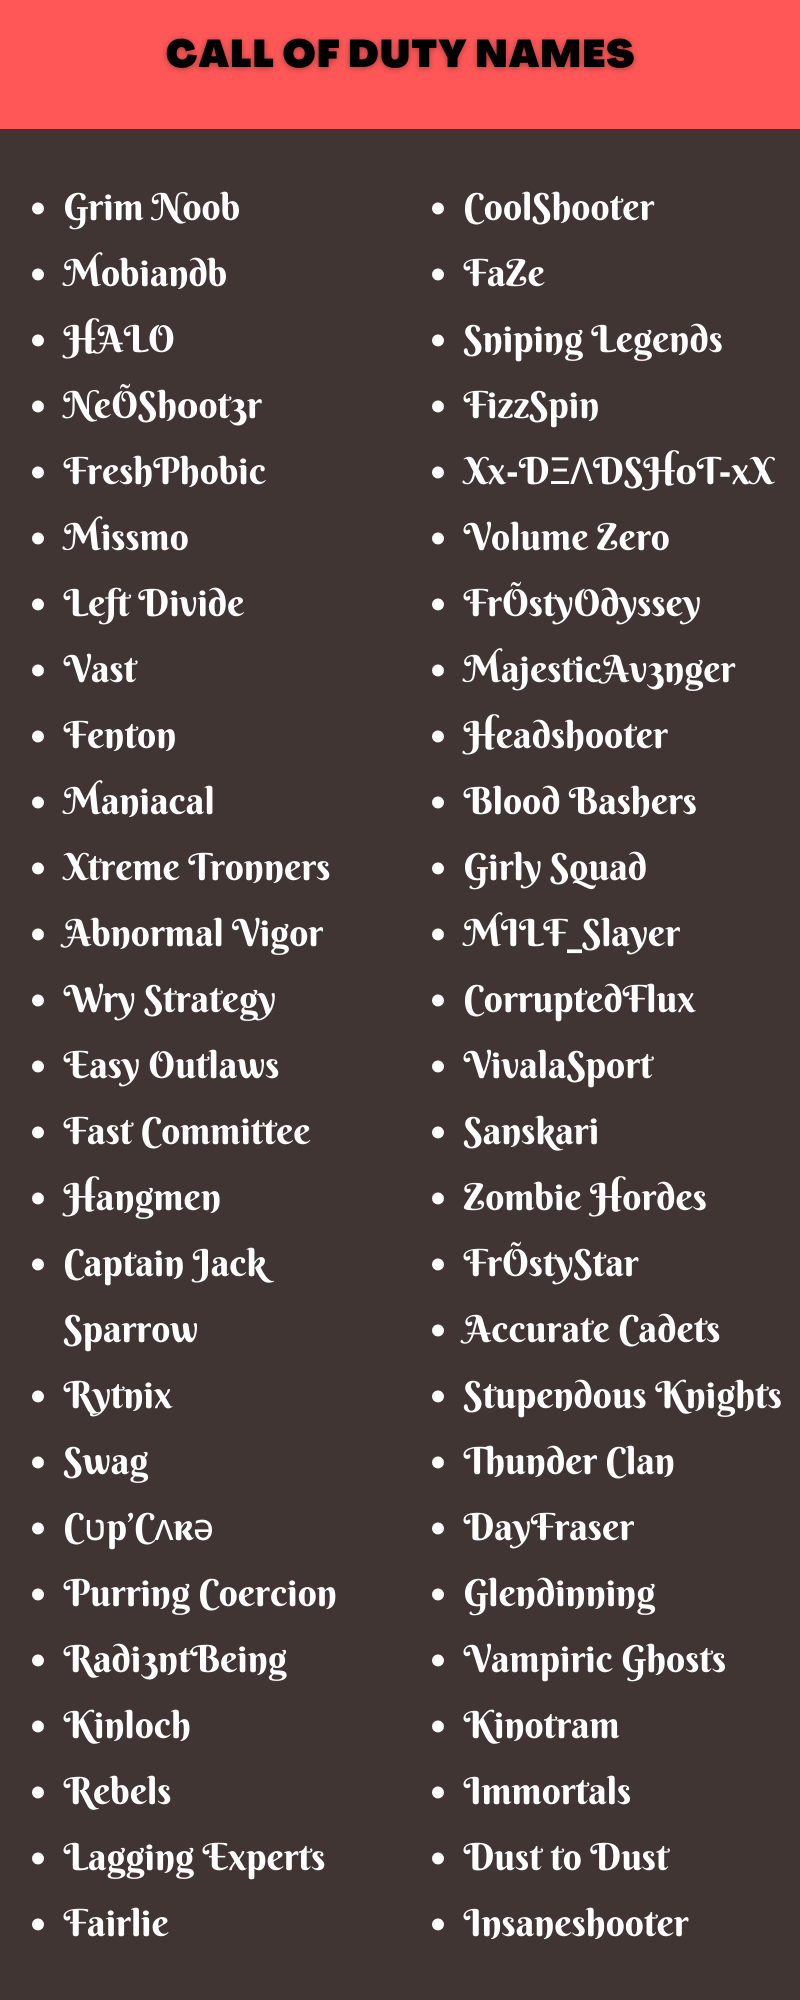 400 Cool Call Of Duty Names Ideas and Suggestions